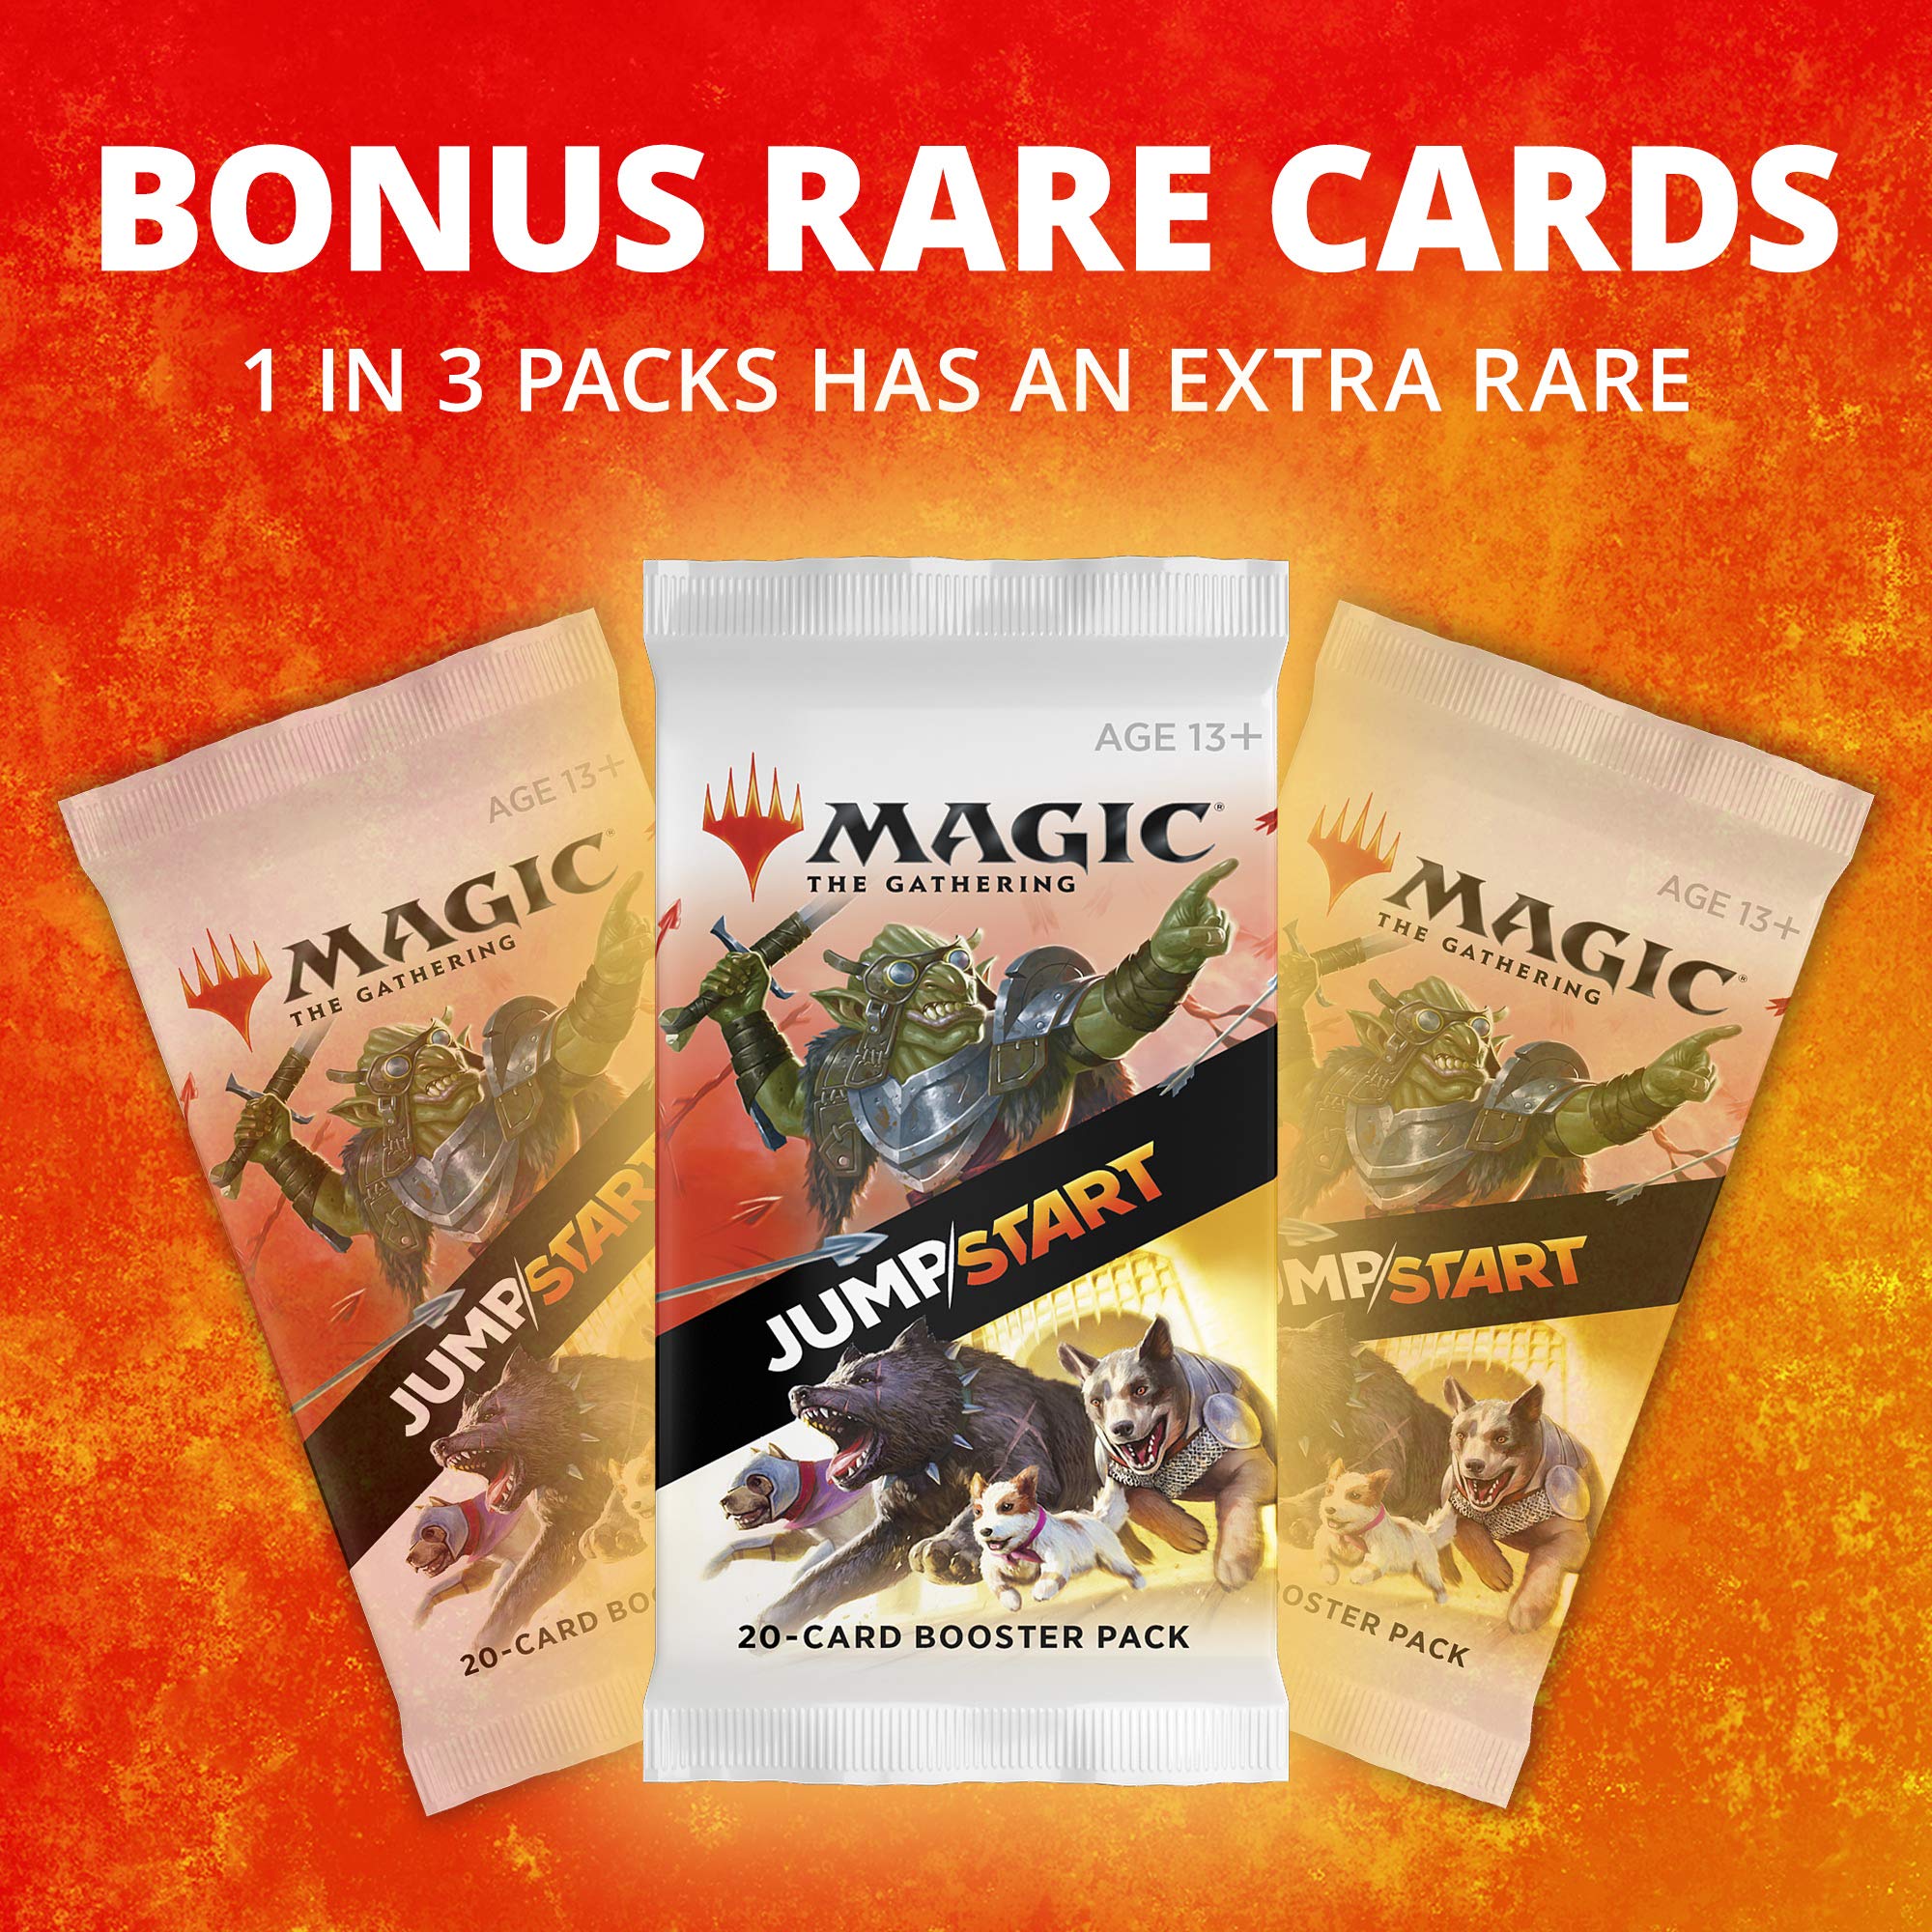 Jumpstart 2020 Booster Box | Magic: The Gathering | 24 Booster Packs | 20 Cards Per Pack Including Basic Land Cards